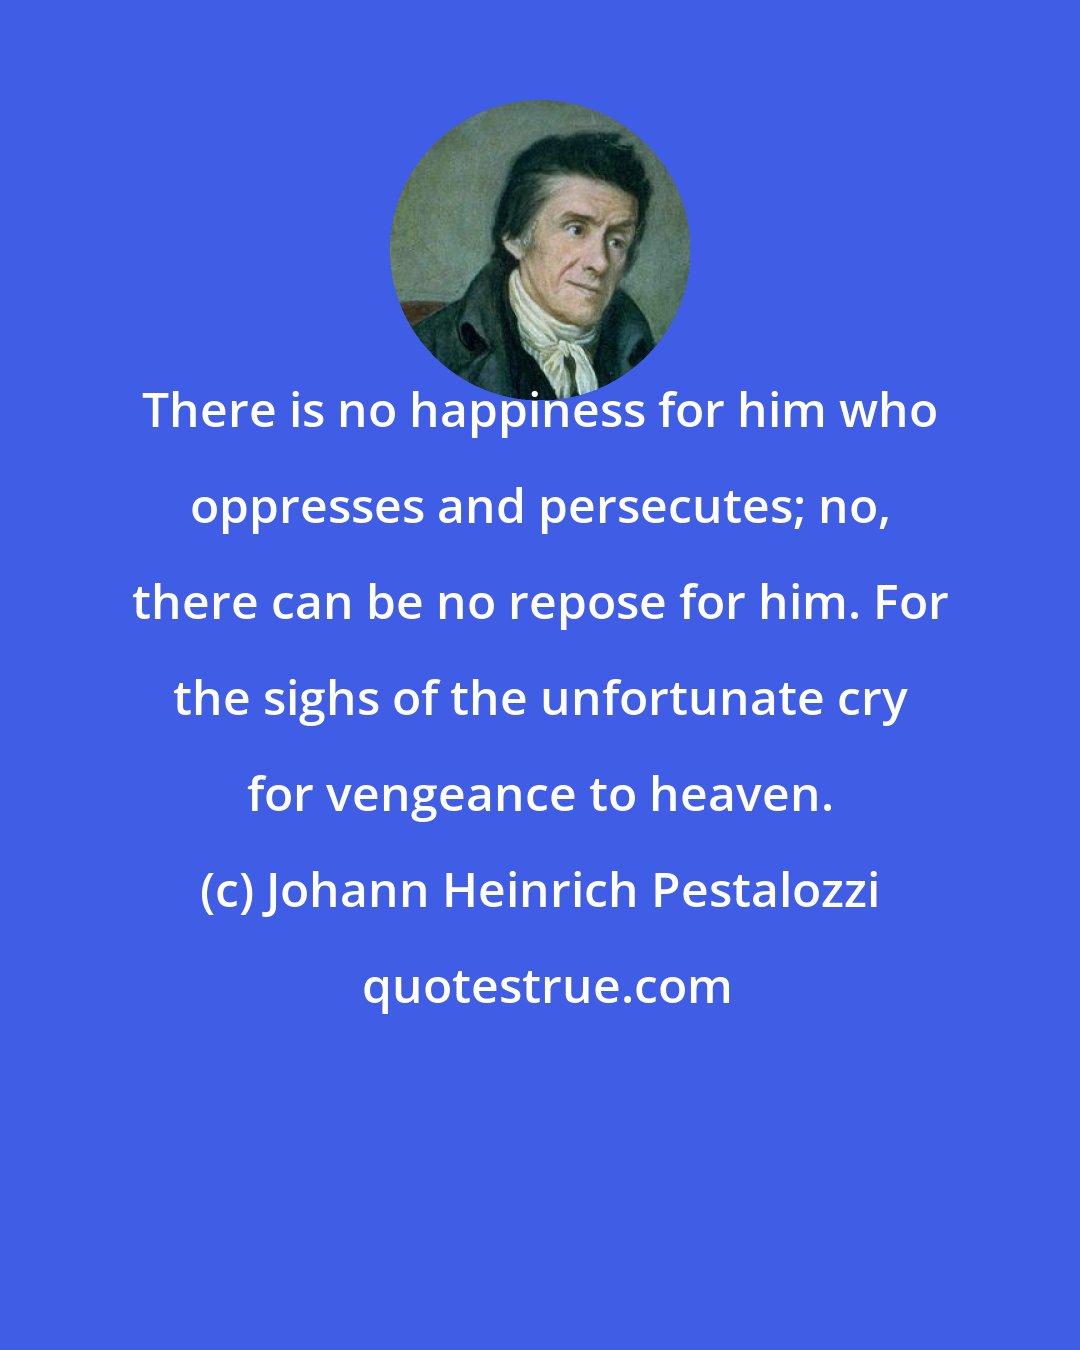 Johann Heinrich Pestalozzi: There is no happiness for him who oppresses and persecutes; no, there can be no repose for him. For the sighs of the unfortunate cry for vengeance to heaven.